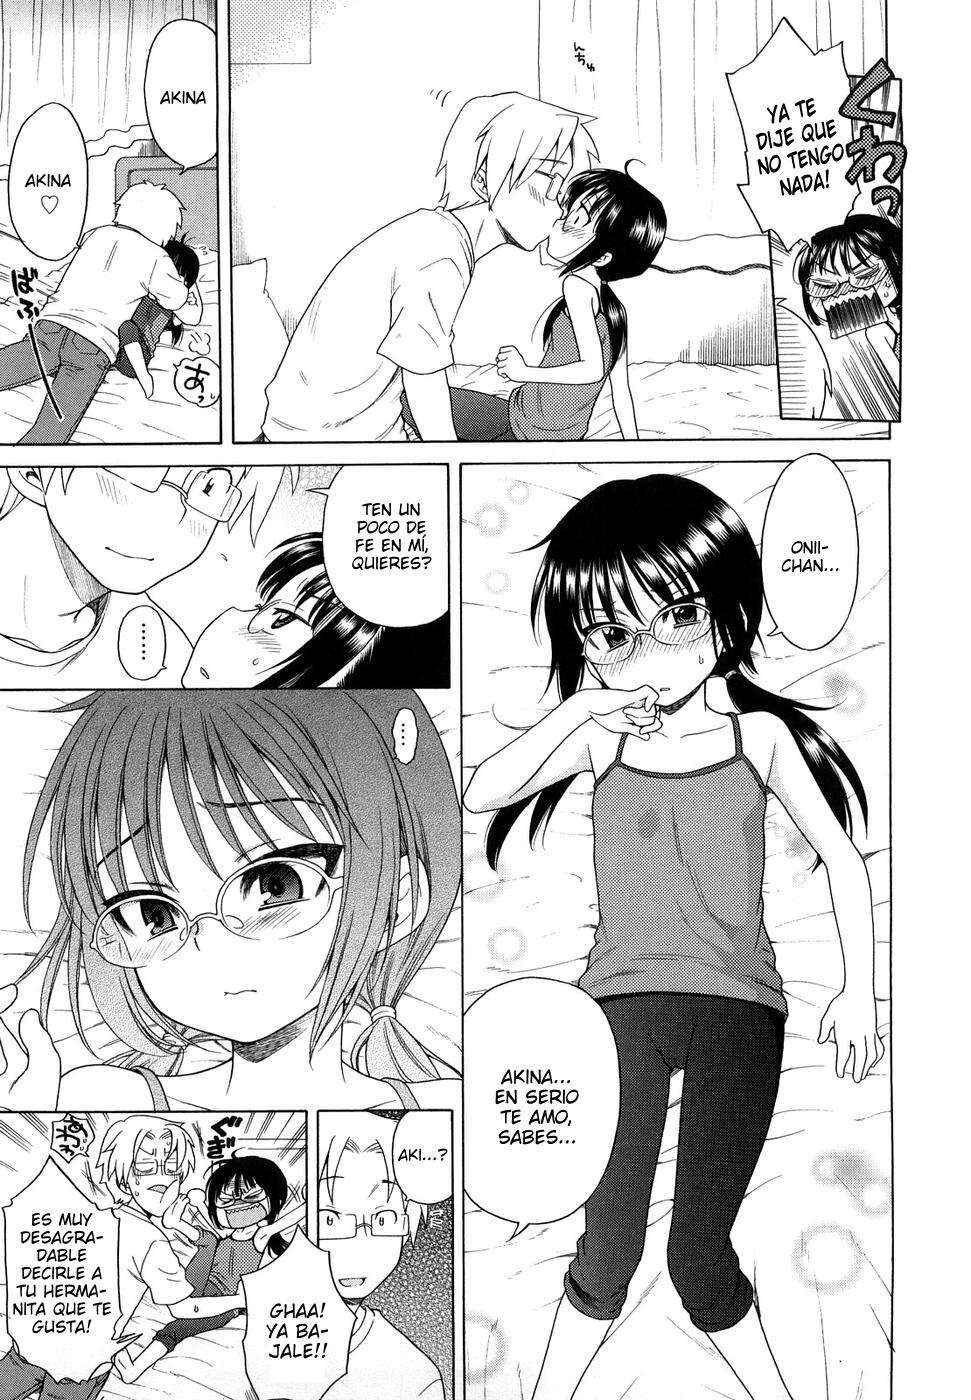 Onii-chan!! Me gustas.. Chapter-10 - 8